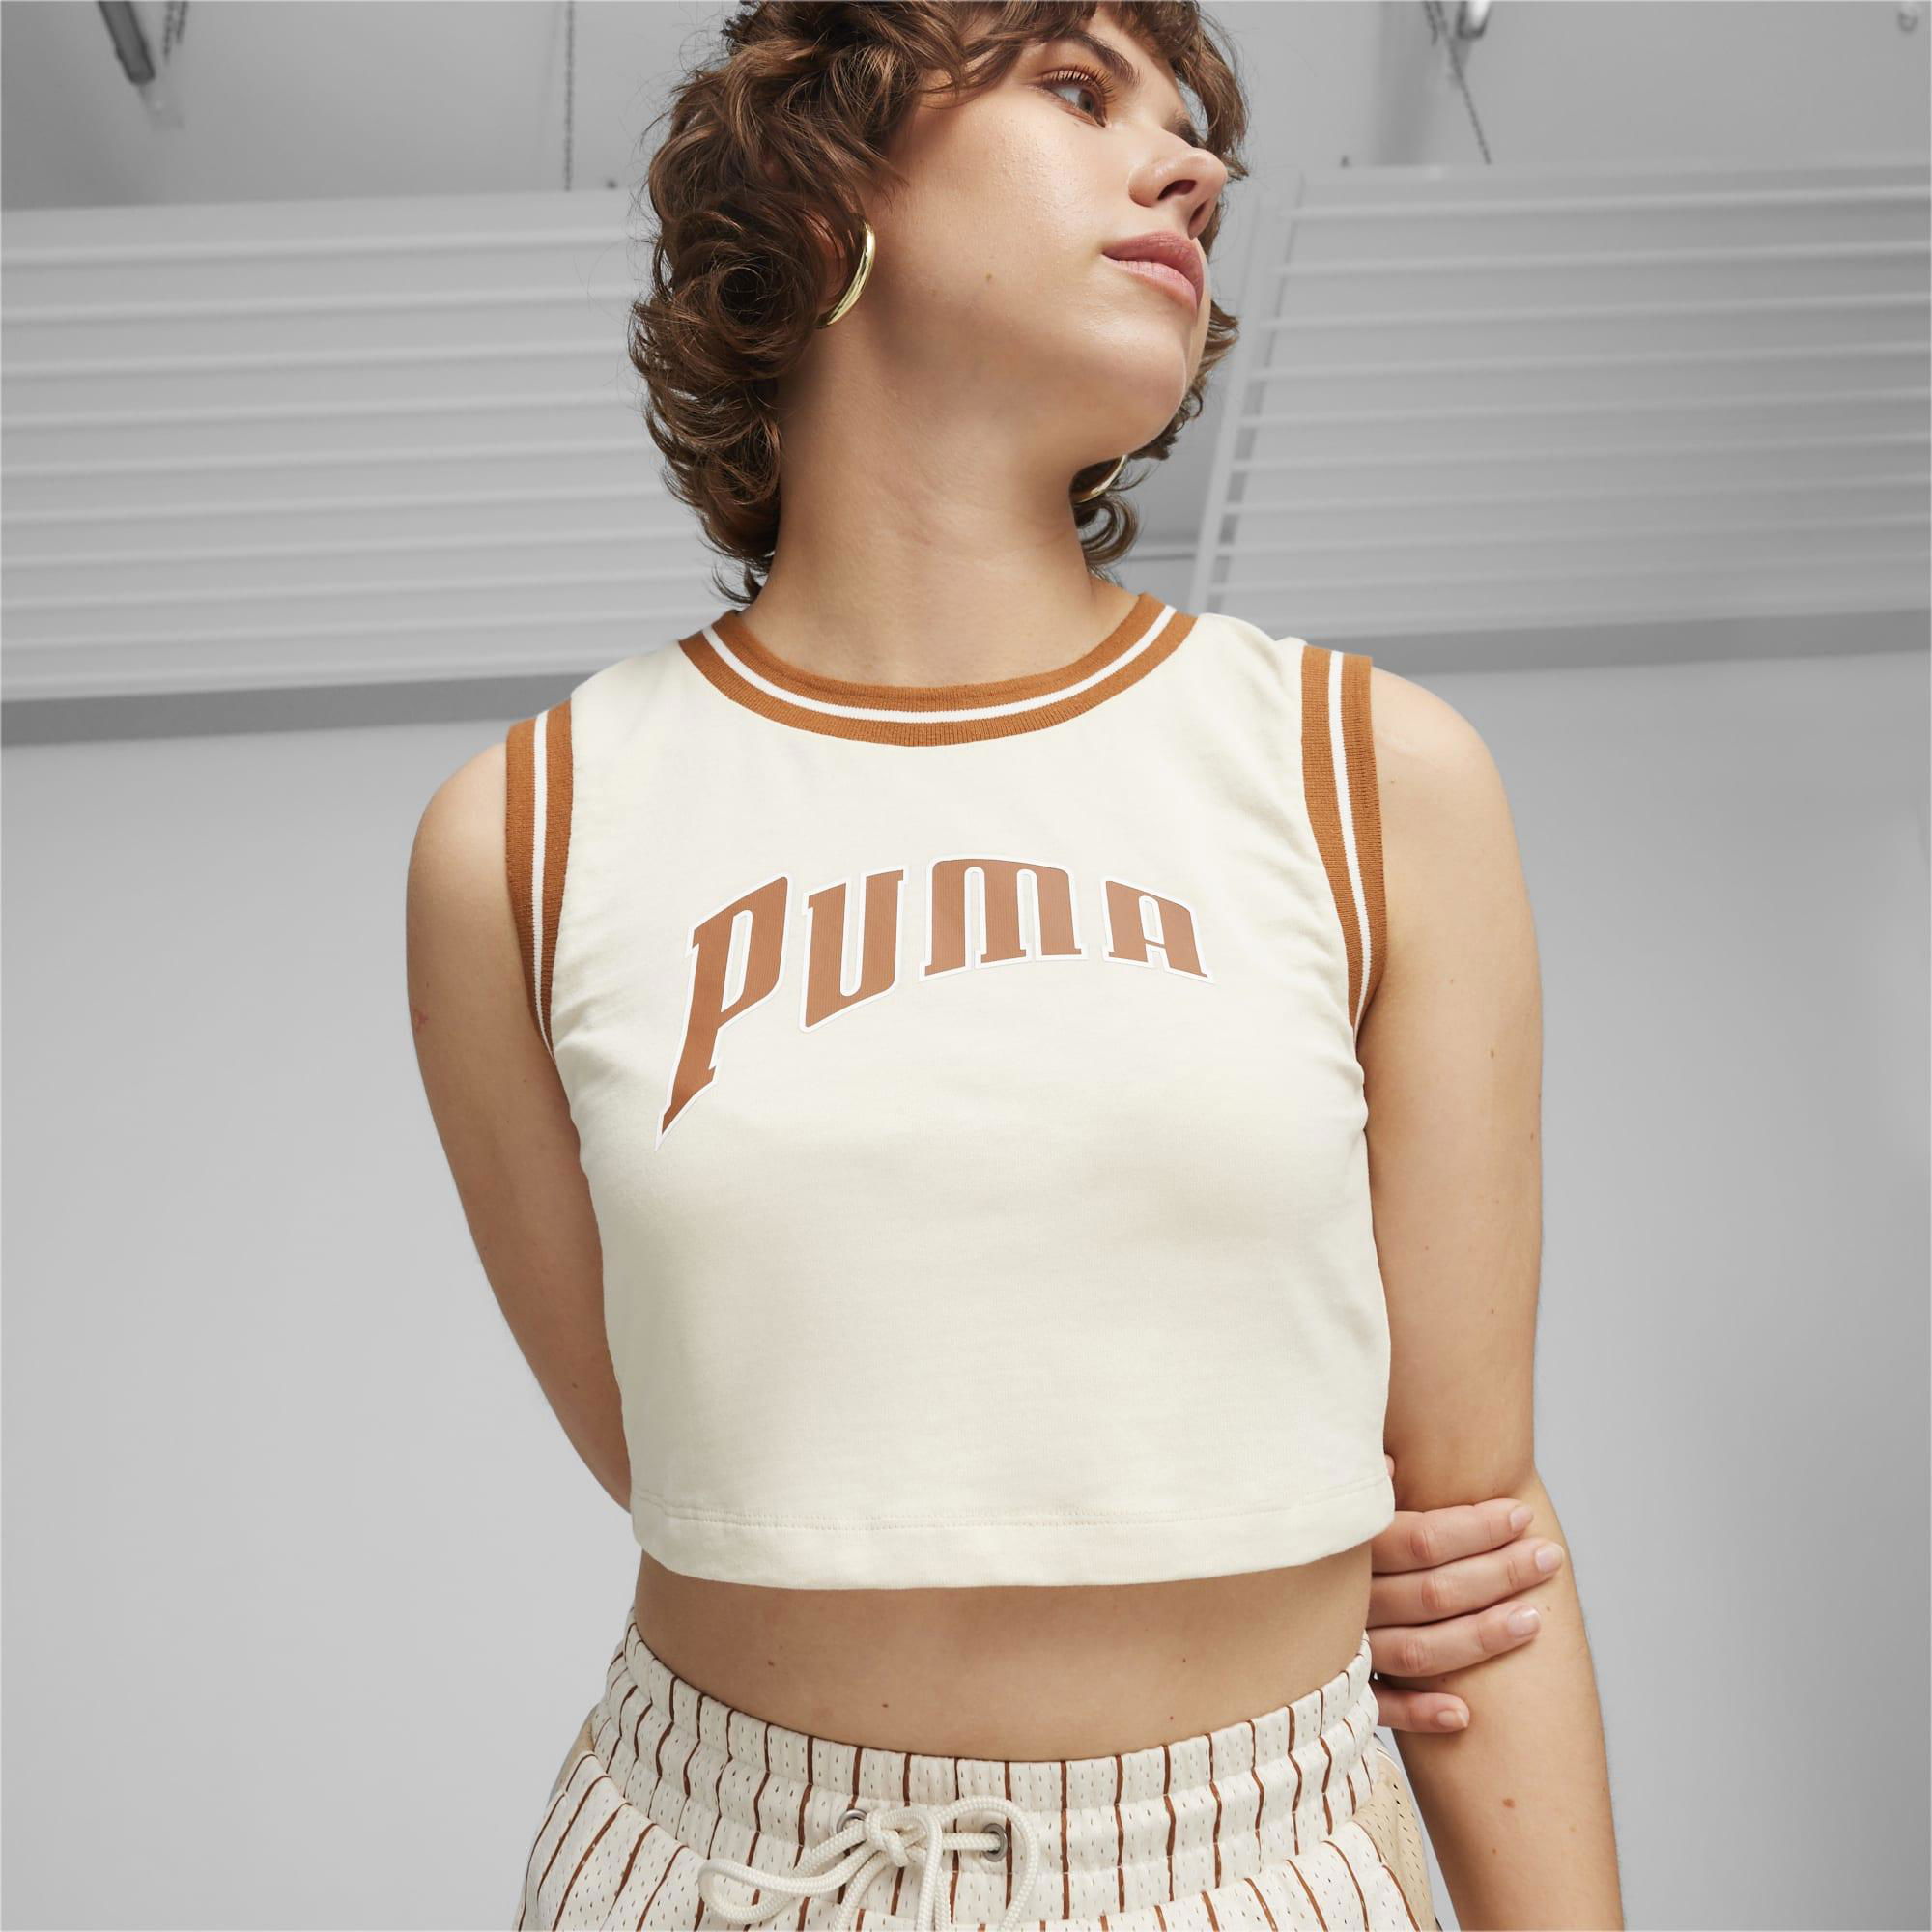 For the Fanbase PUMA TEAM Women's Graphic Crop Top by PUMA